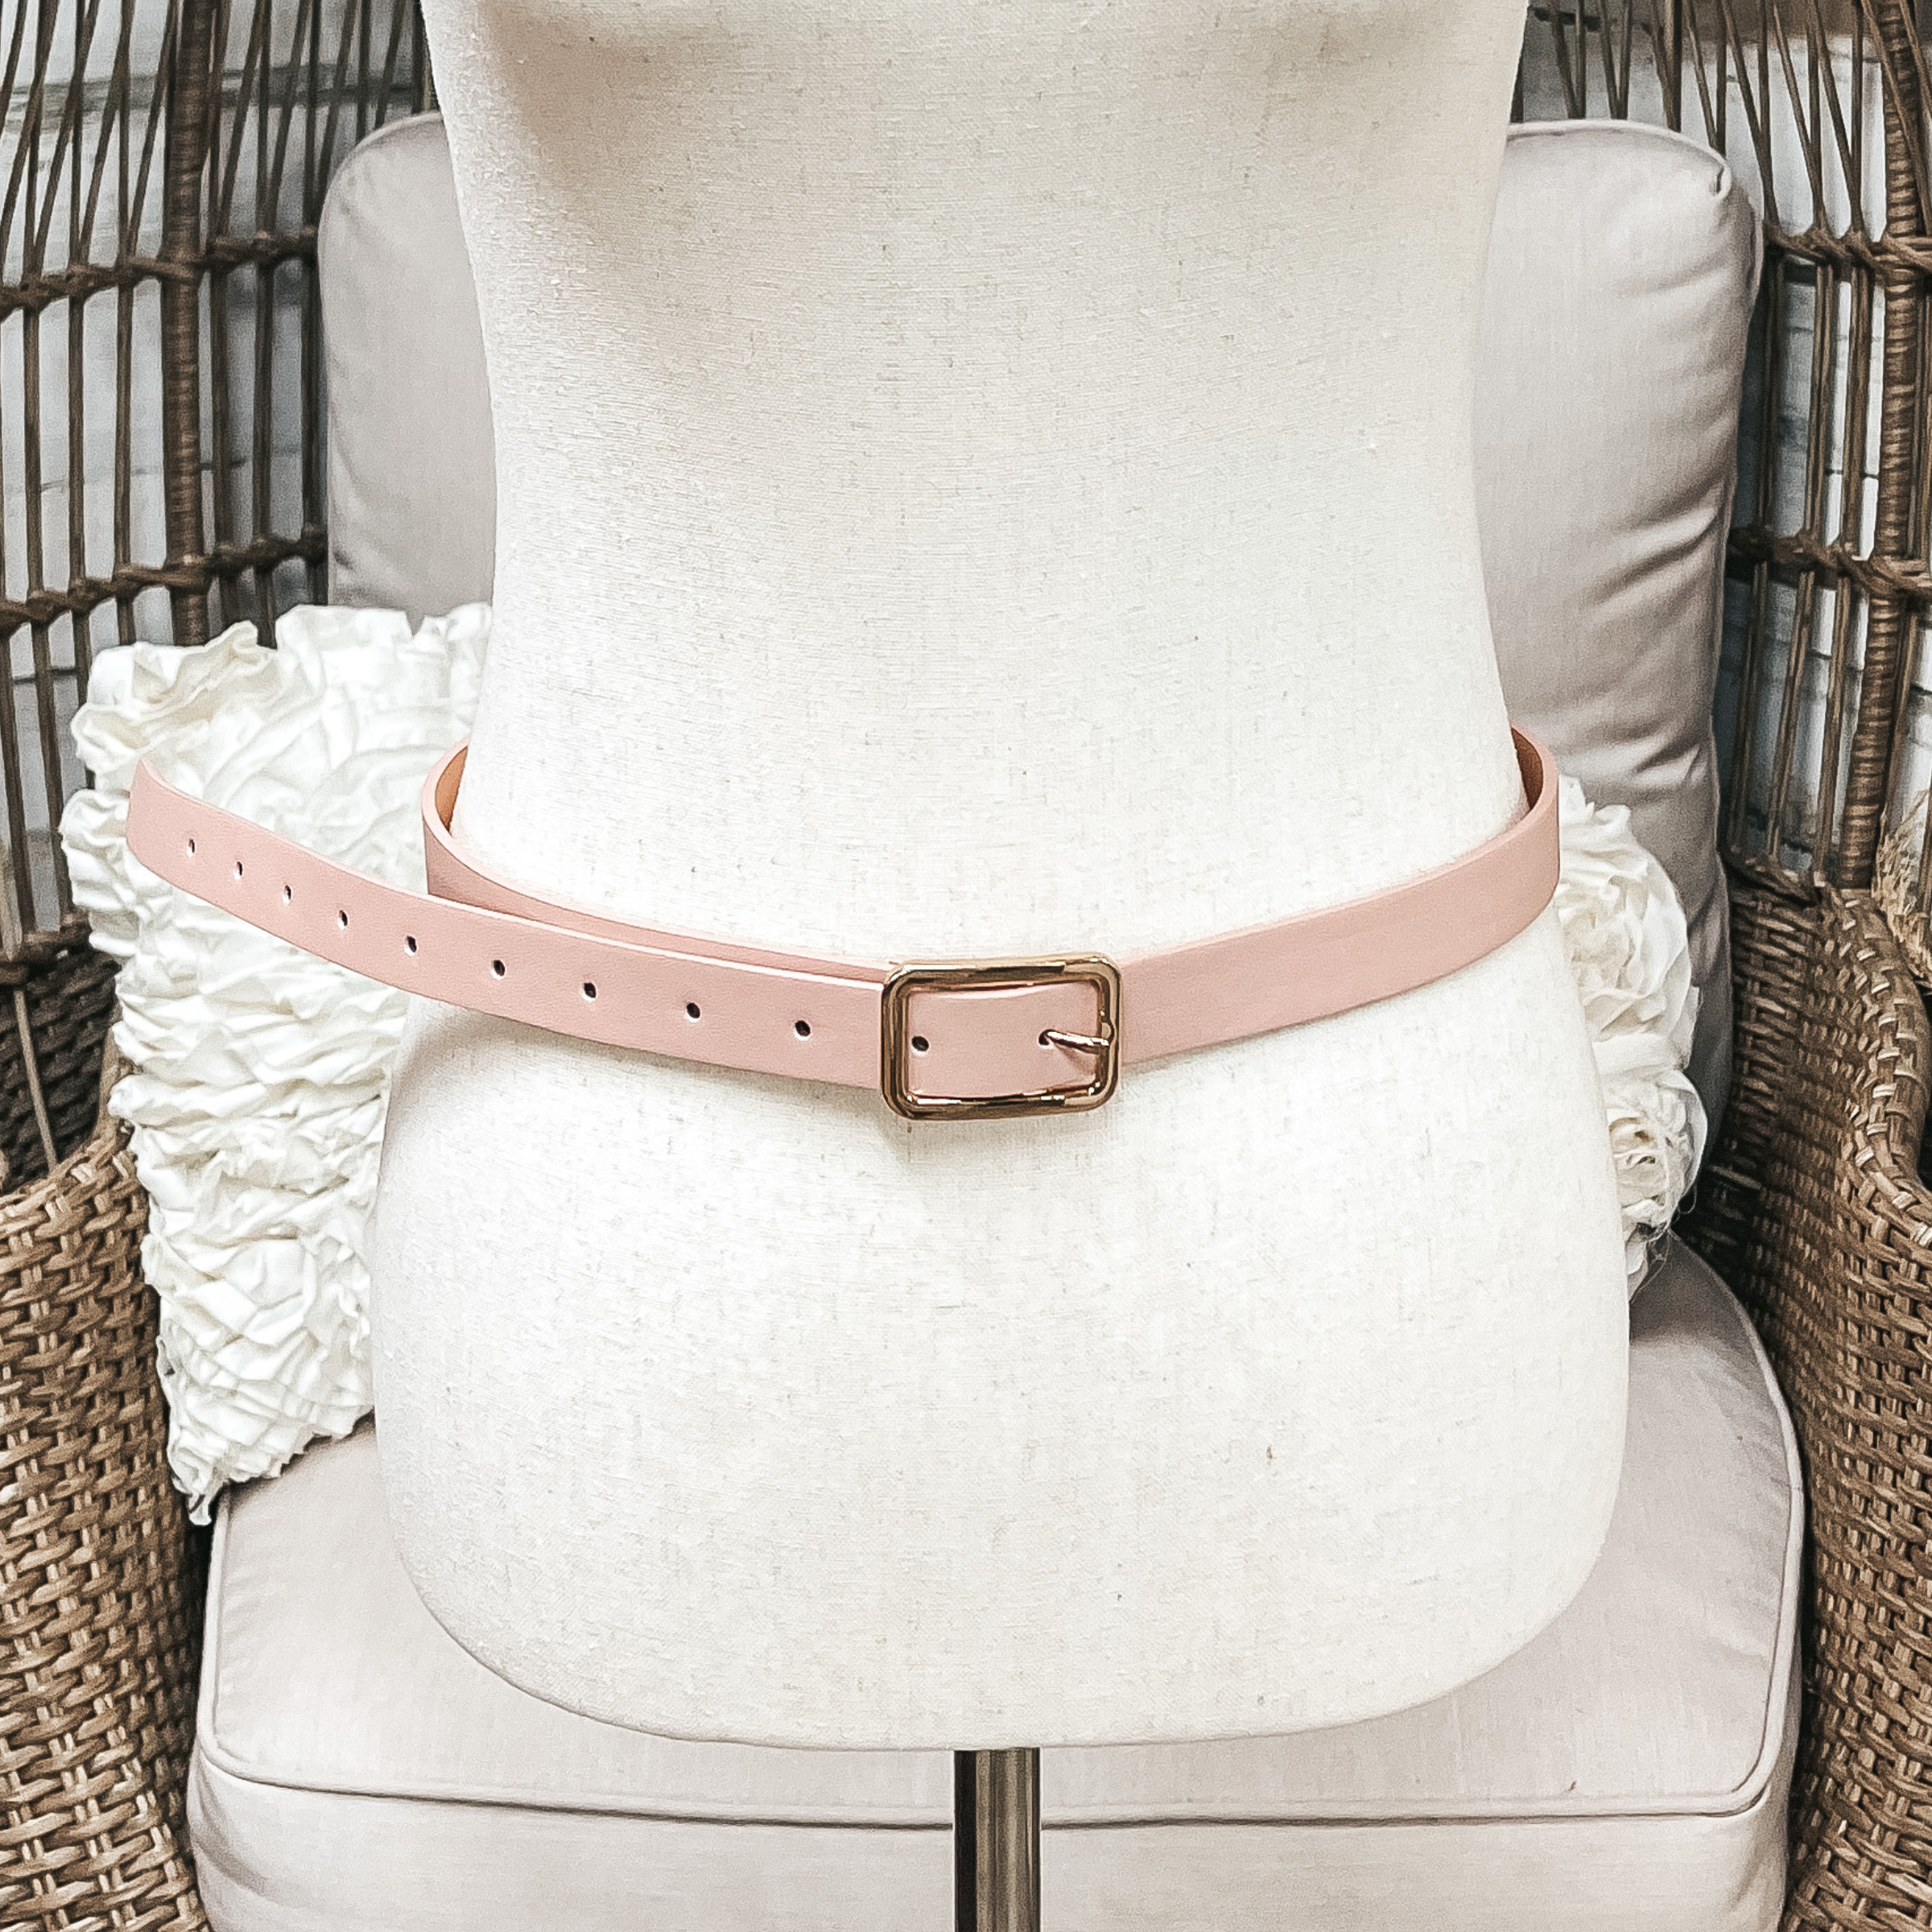 Set of Three | Skinny Fashion Belts in Black, White, and Nude - Giddy Up Glamour Boutique